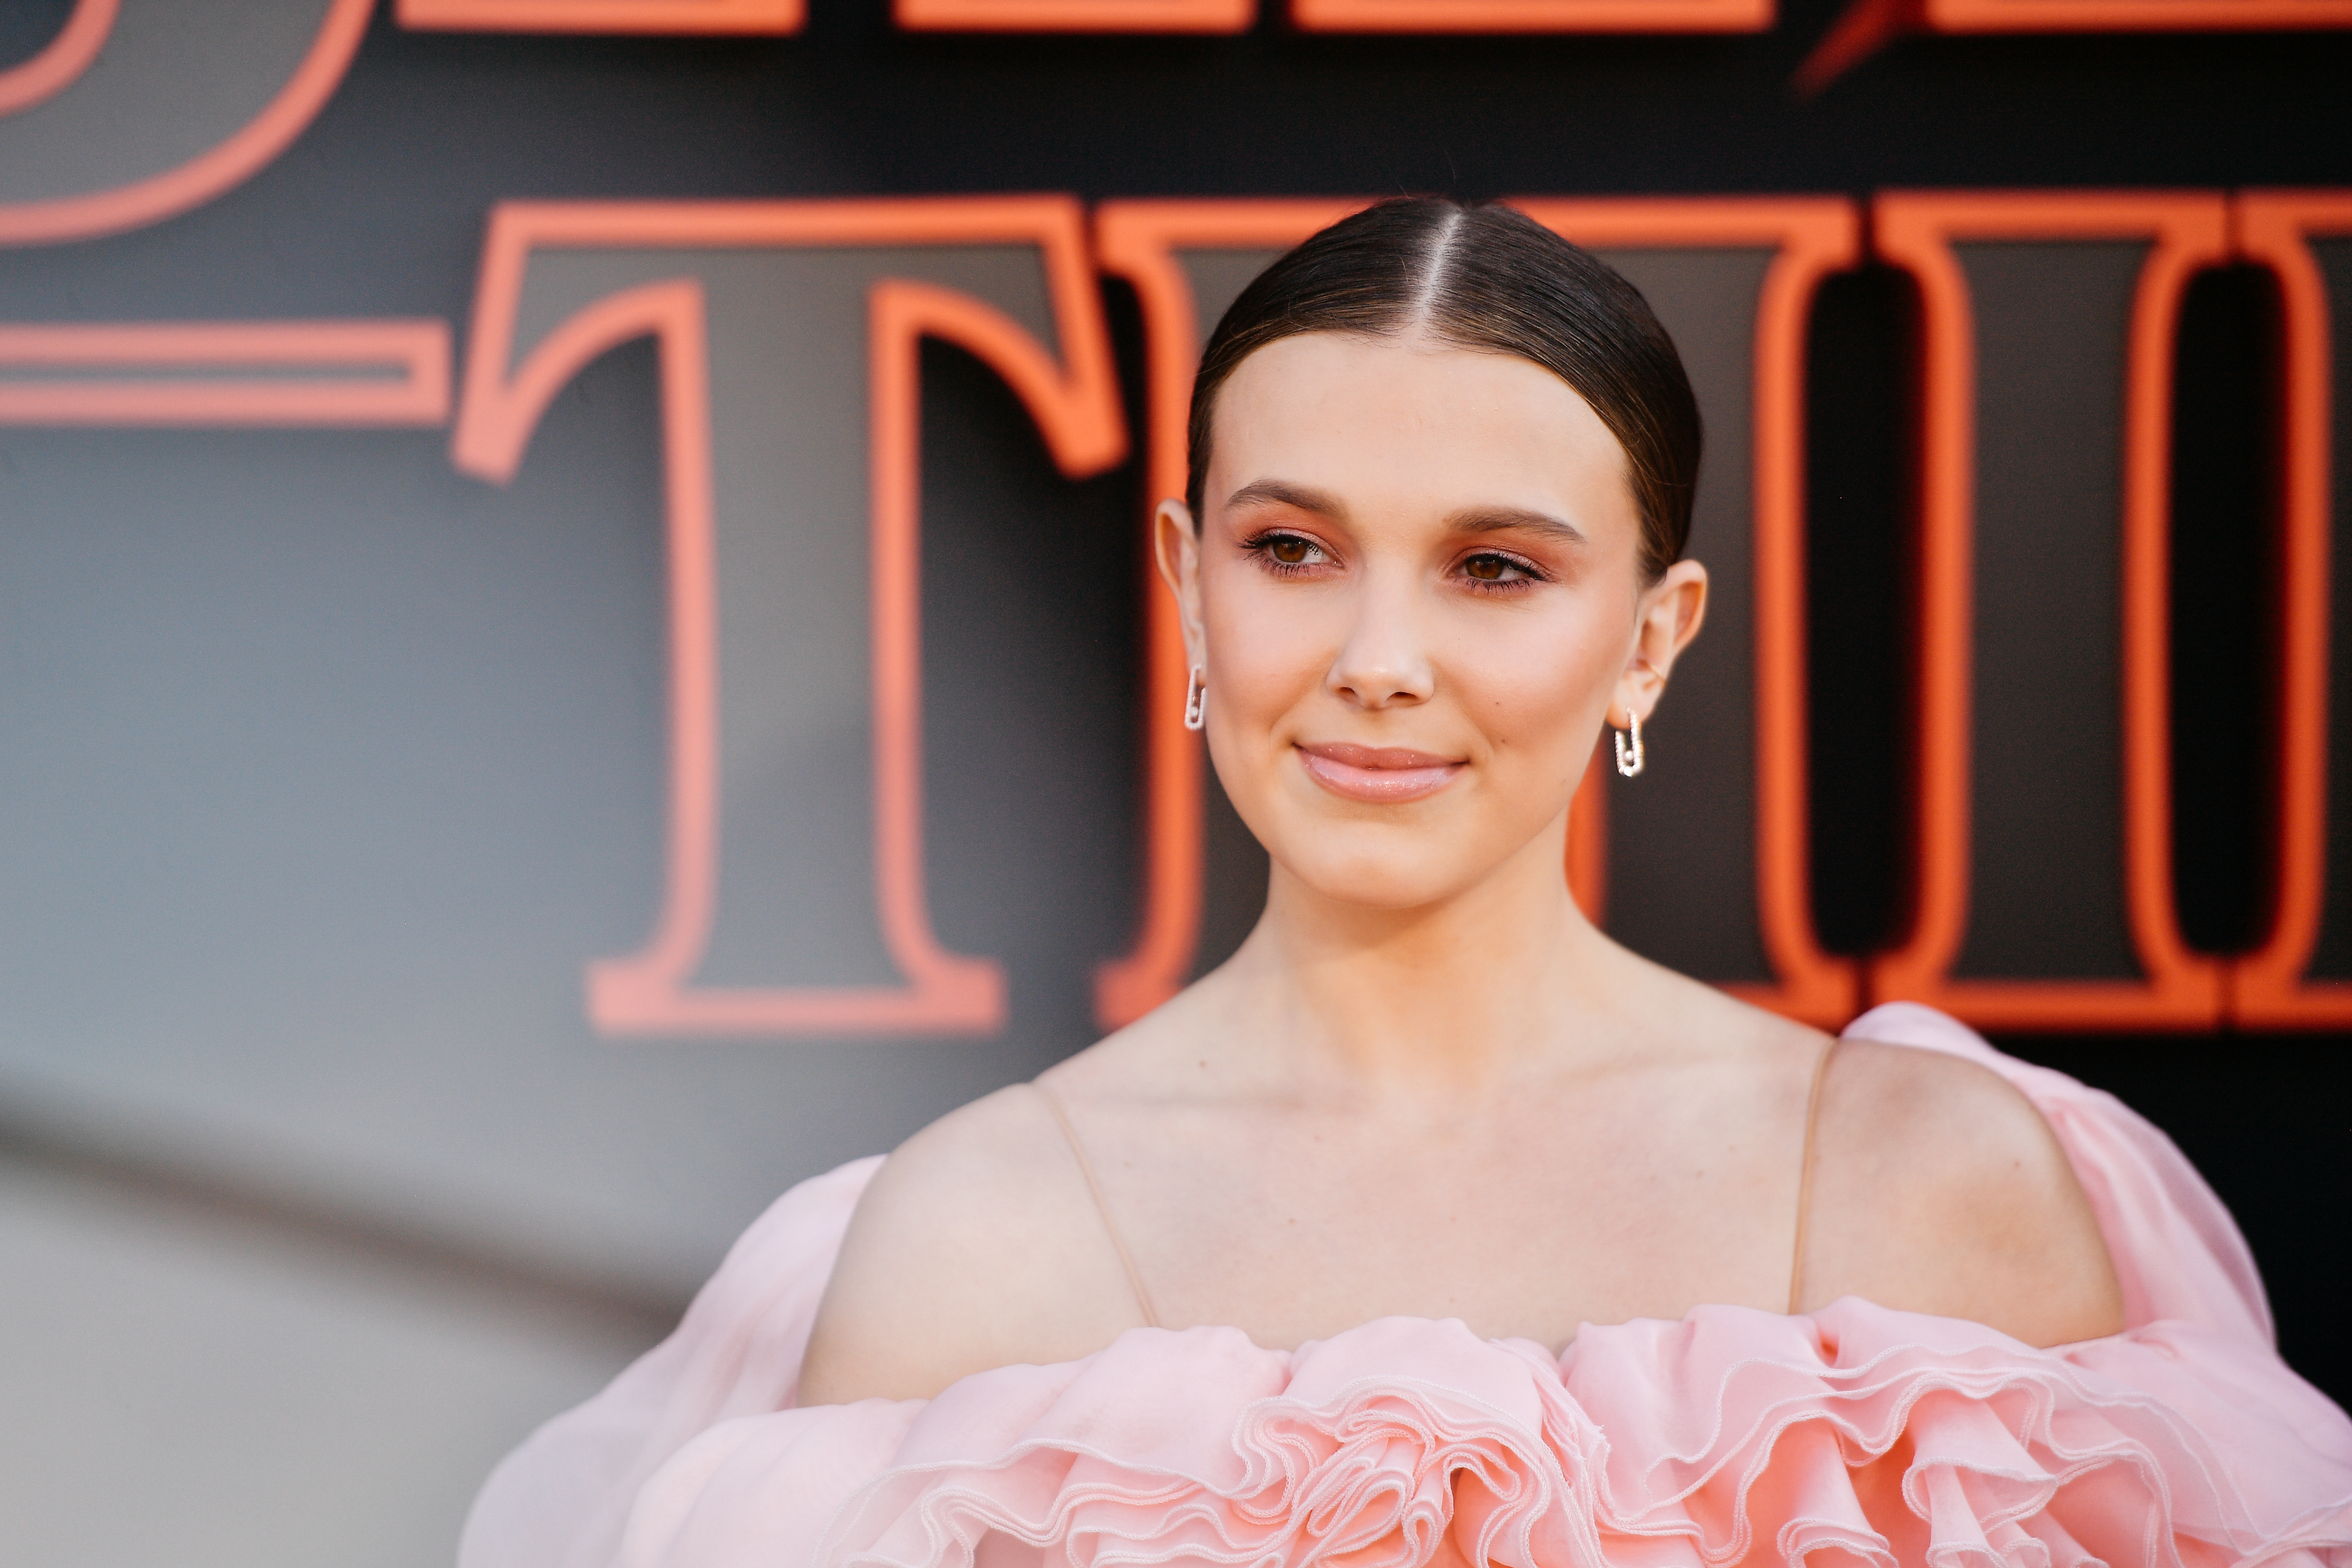 Millie Bobby Brown Is Teaming Up With Her Big Sis To Make A New Netflix Movie